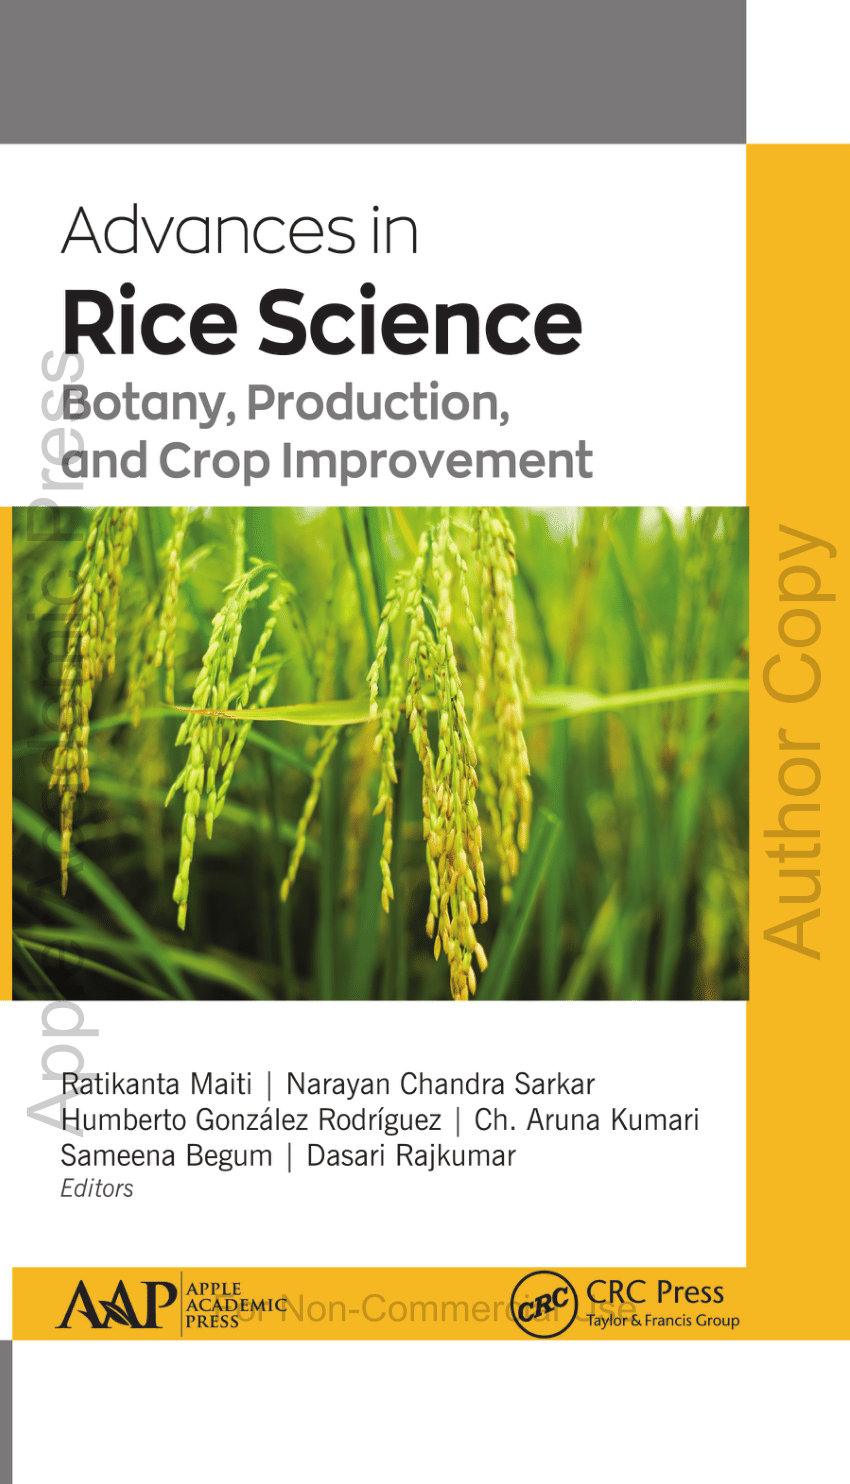 rice research articles